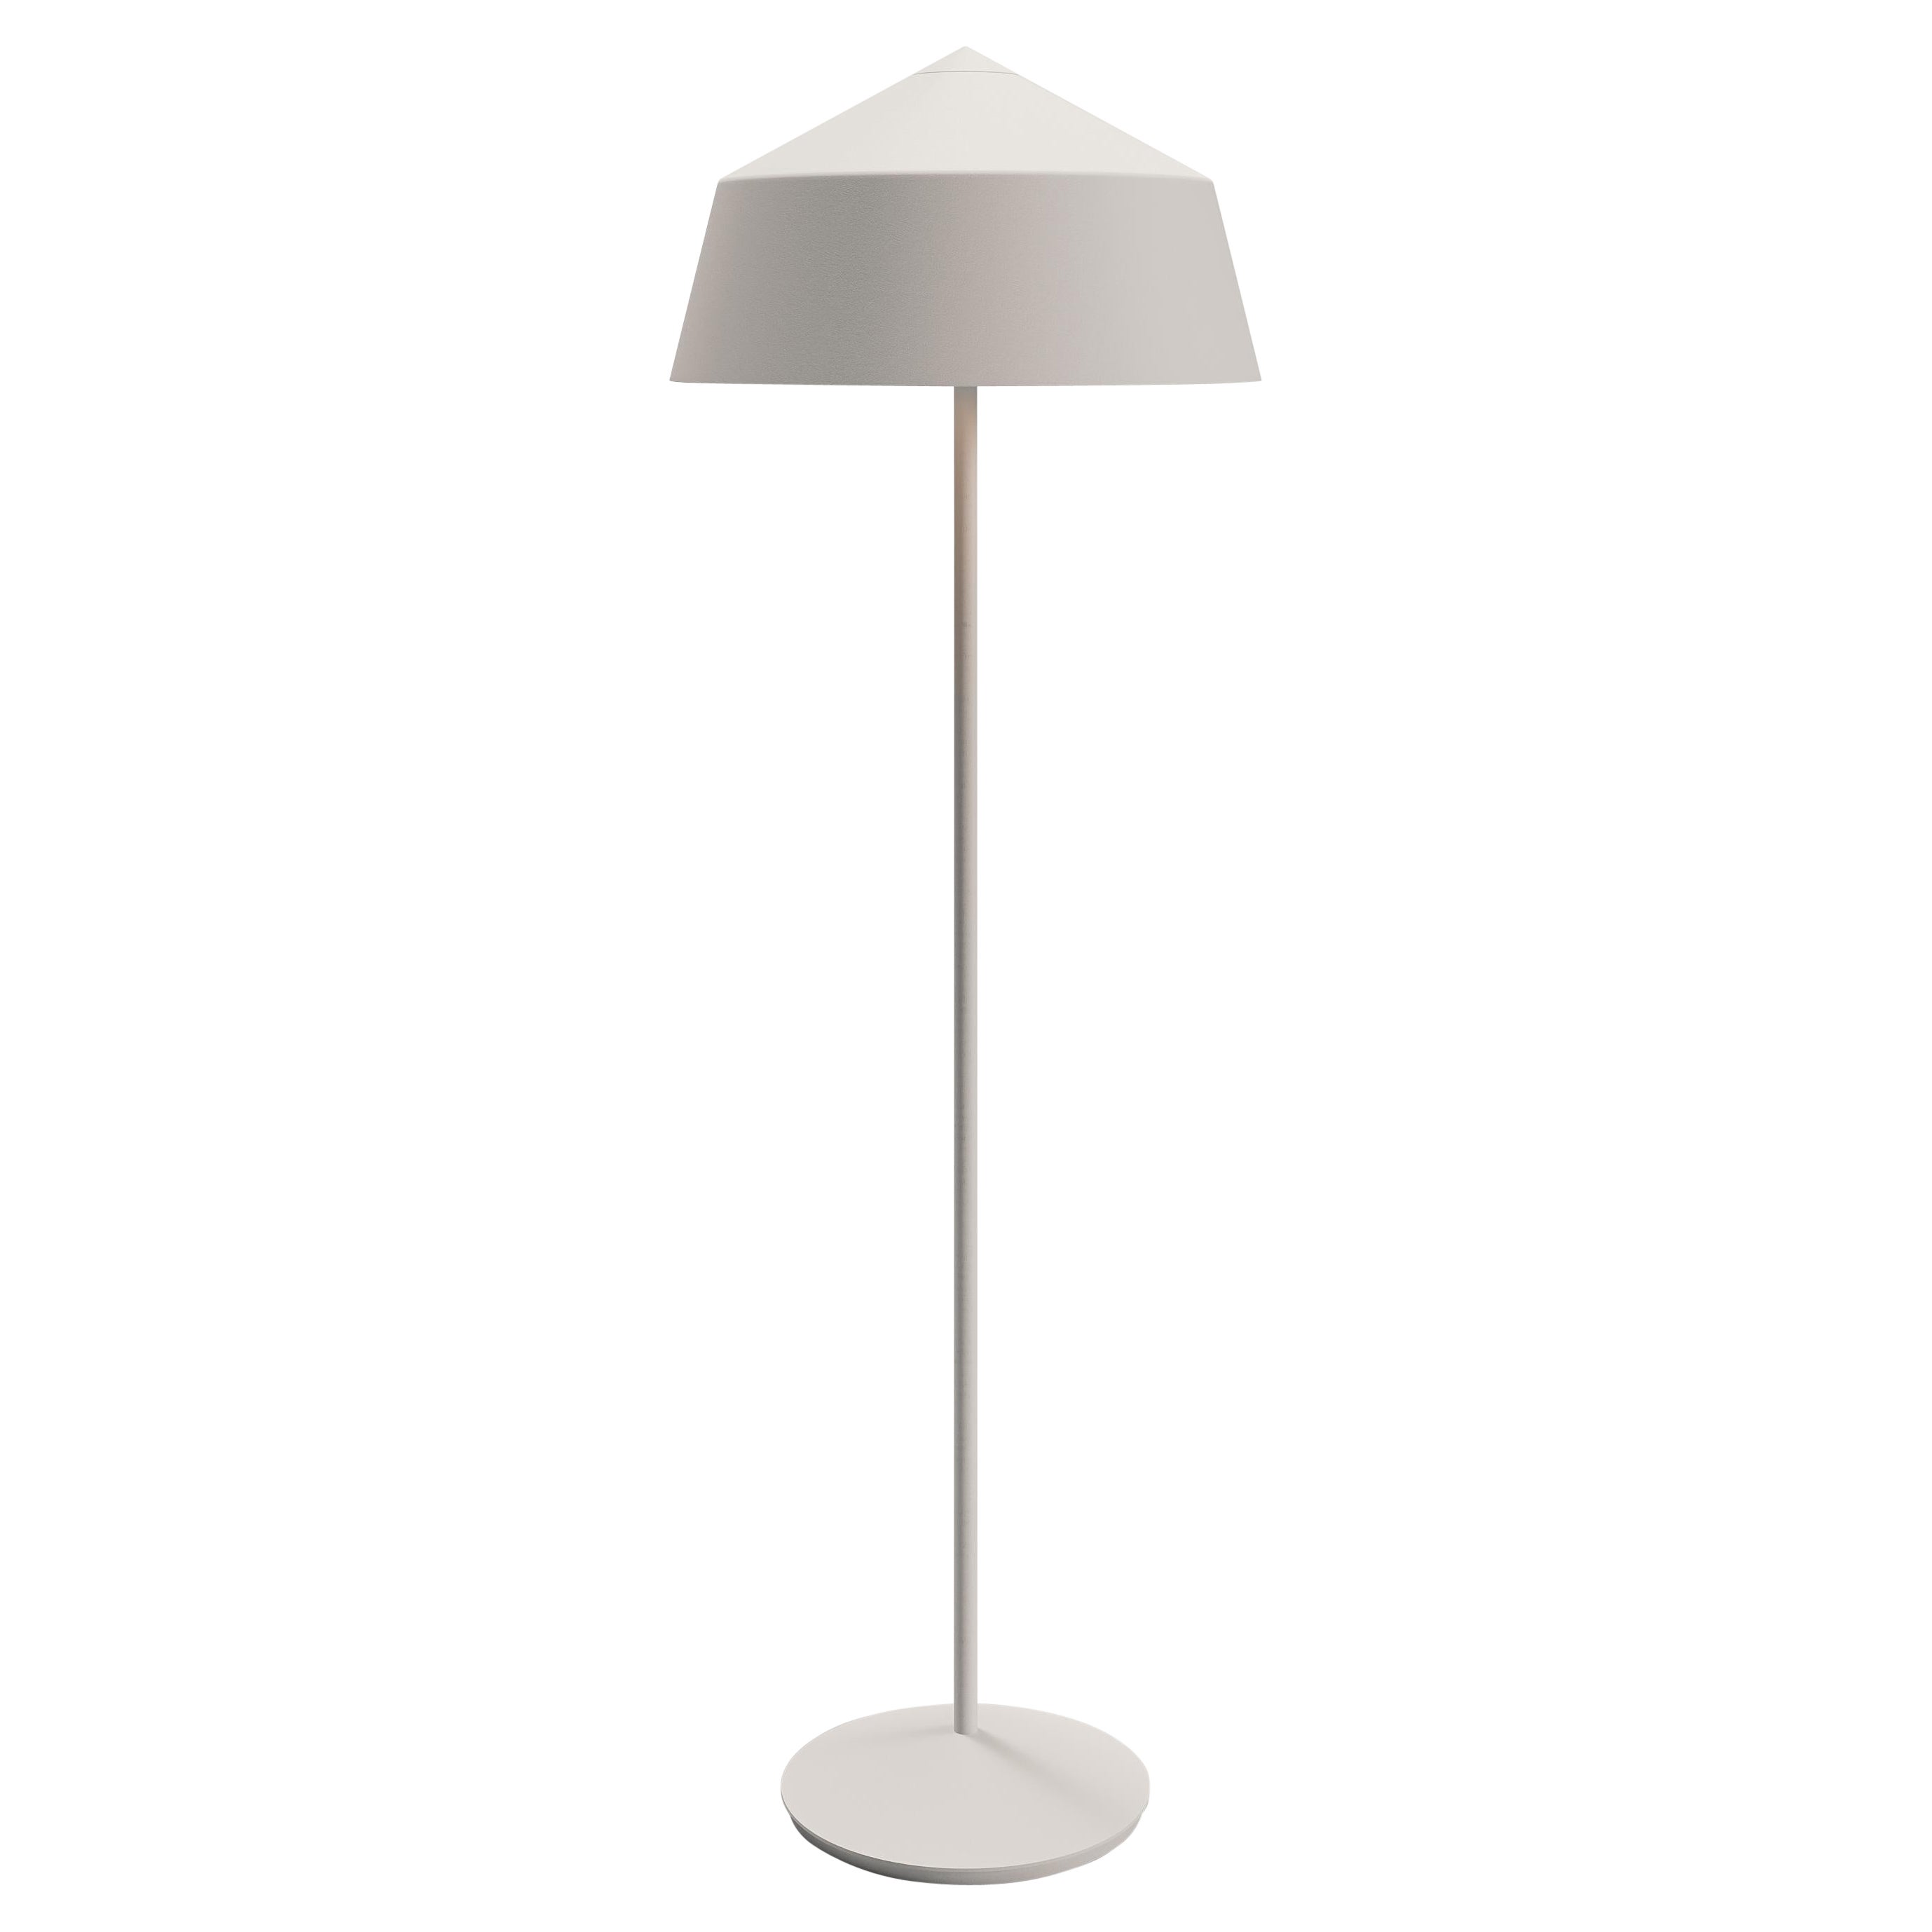 Circus Floor Lamp Designed by Corinna Warm for Warm White/Bronze For Sale